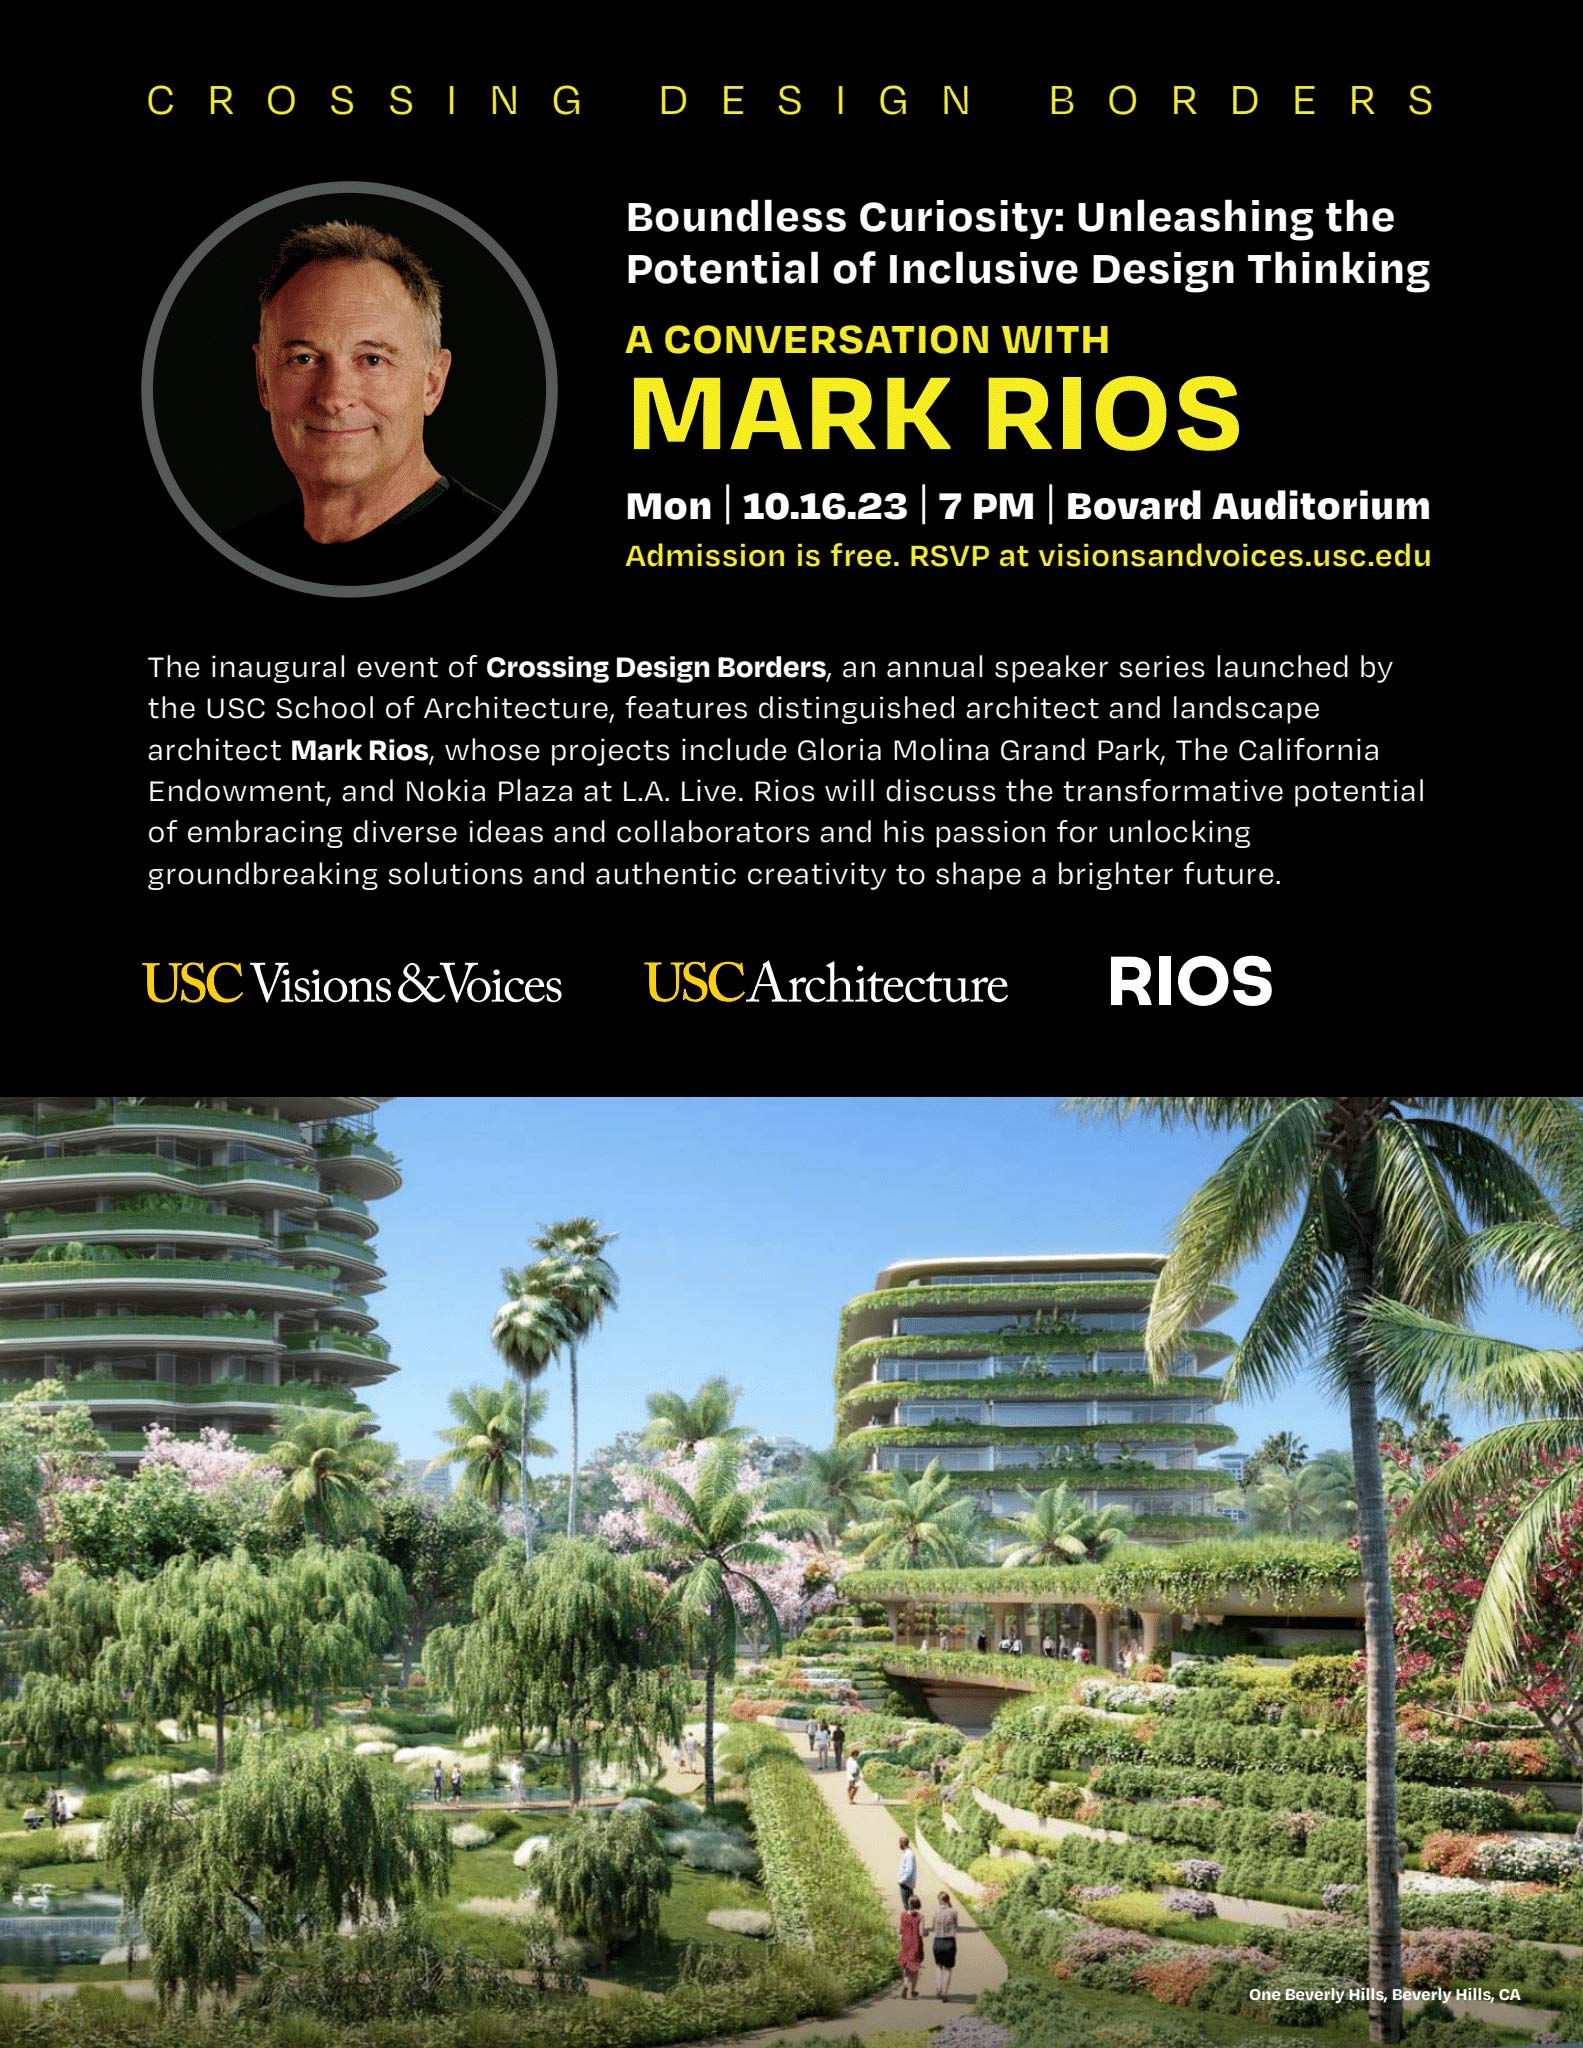 Event flyer promoting Mark Rios' speaking engagement with USC Vision & Voices at USC School of Architecture